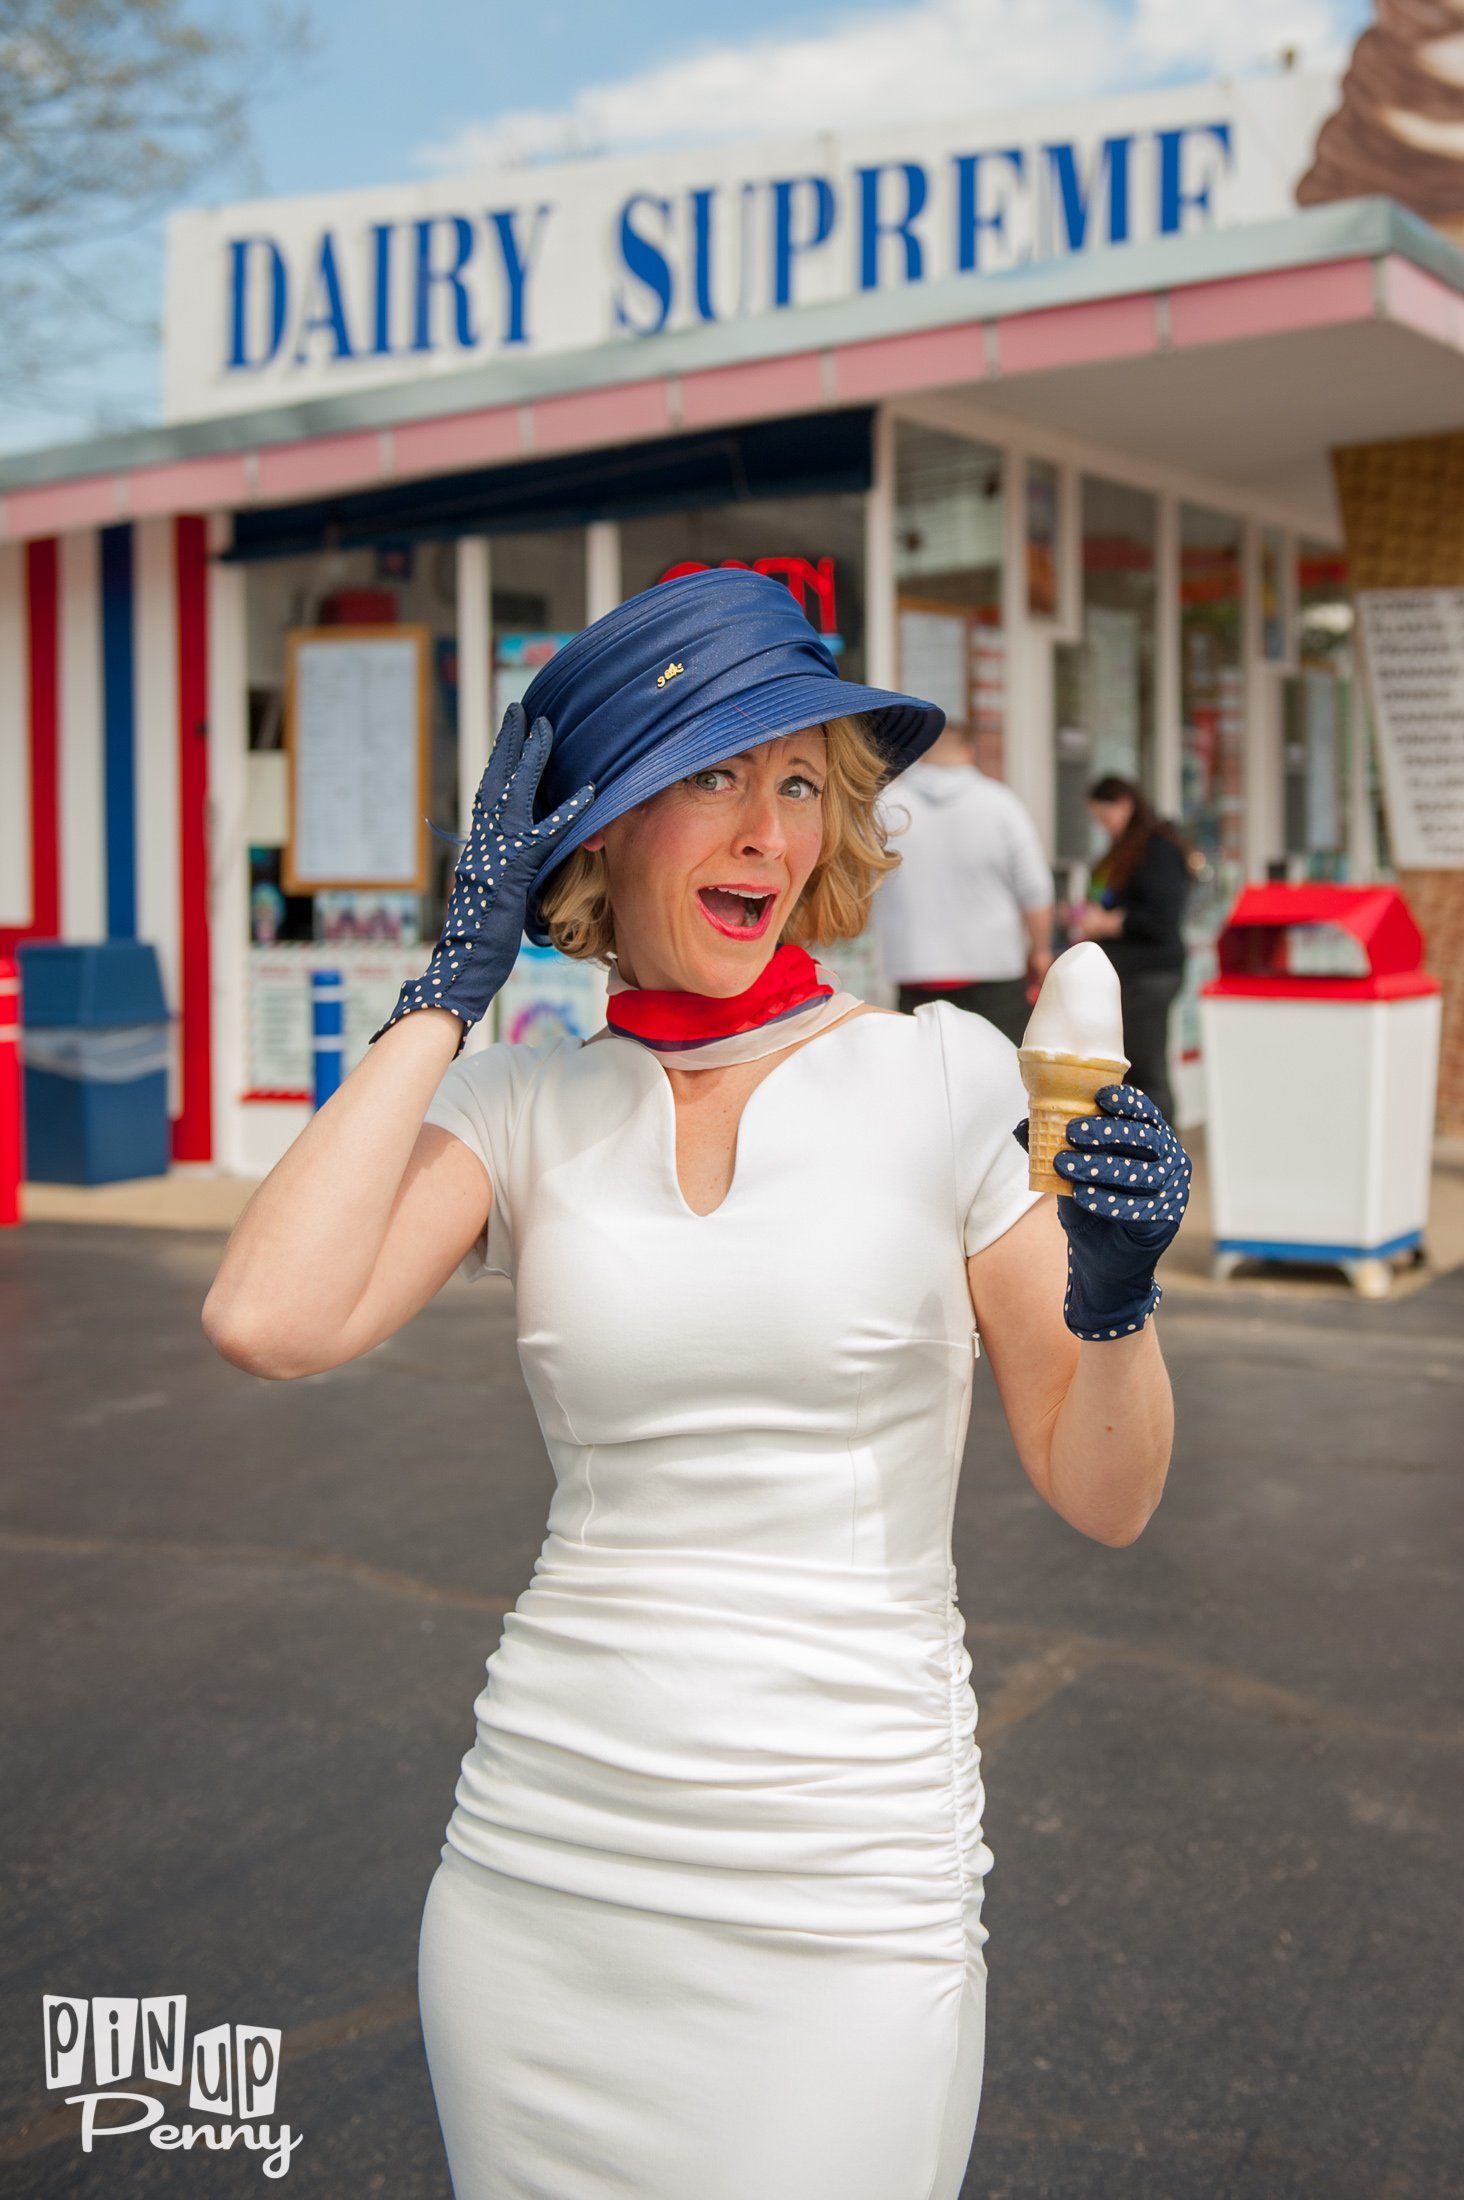 a woman in a white dress is holding an ice cream cone in front of a dairy supreme store .